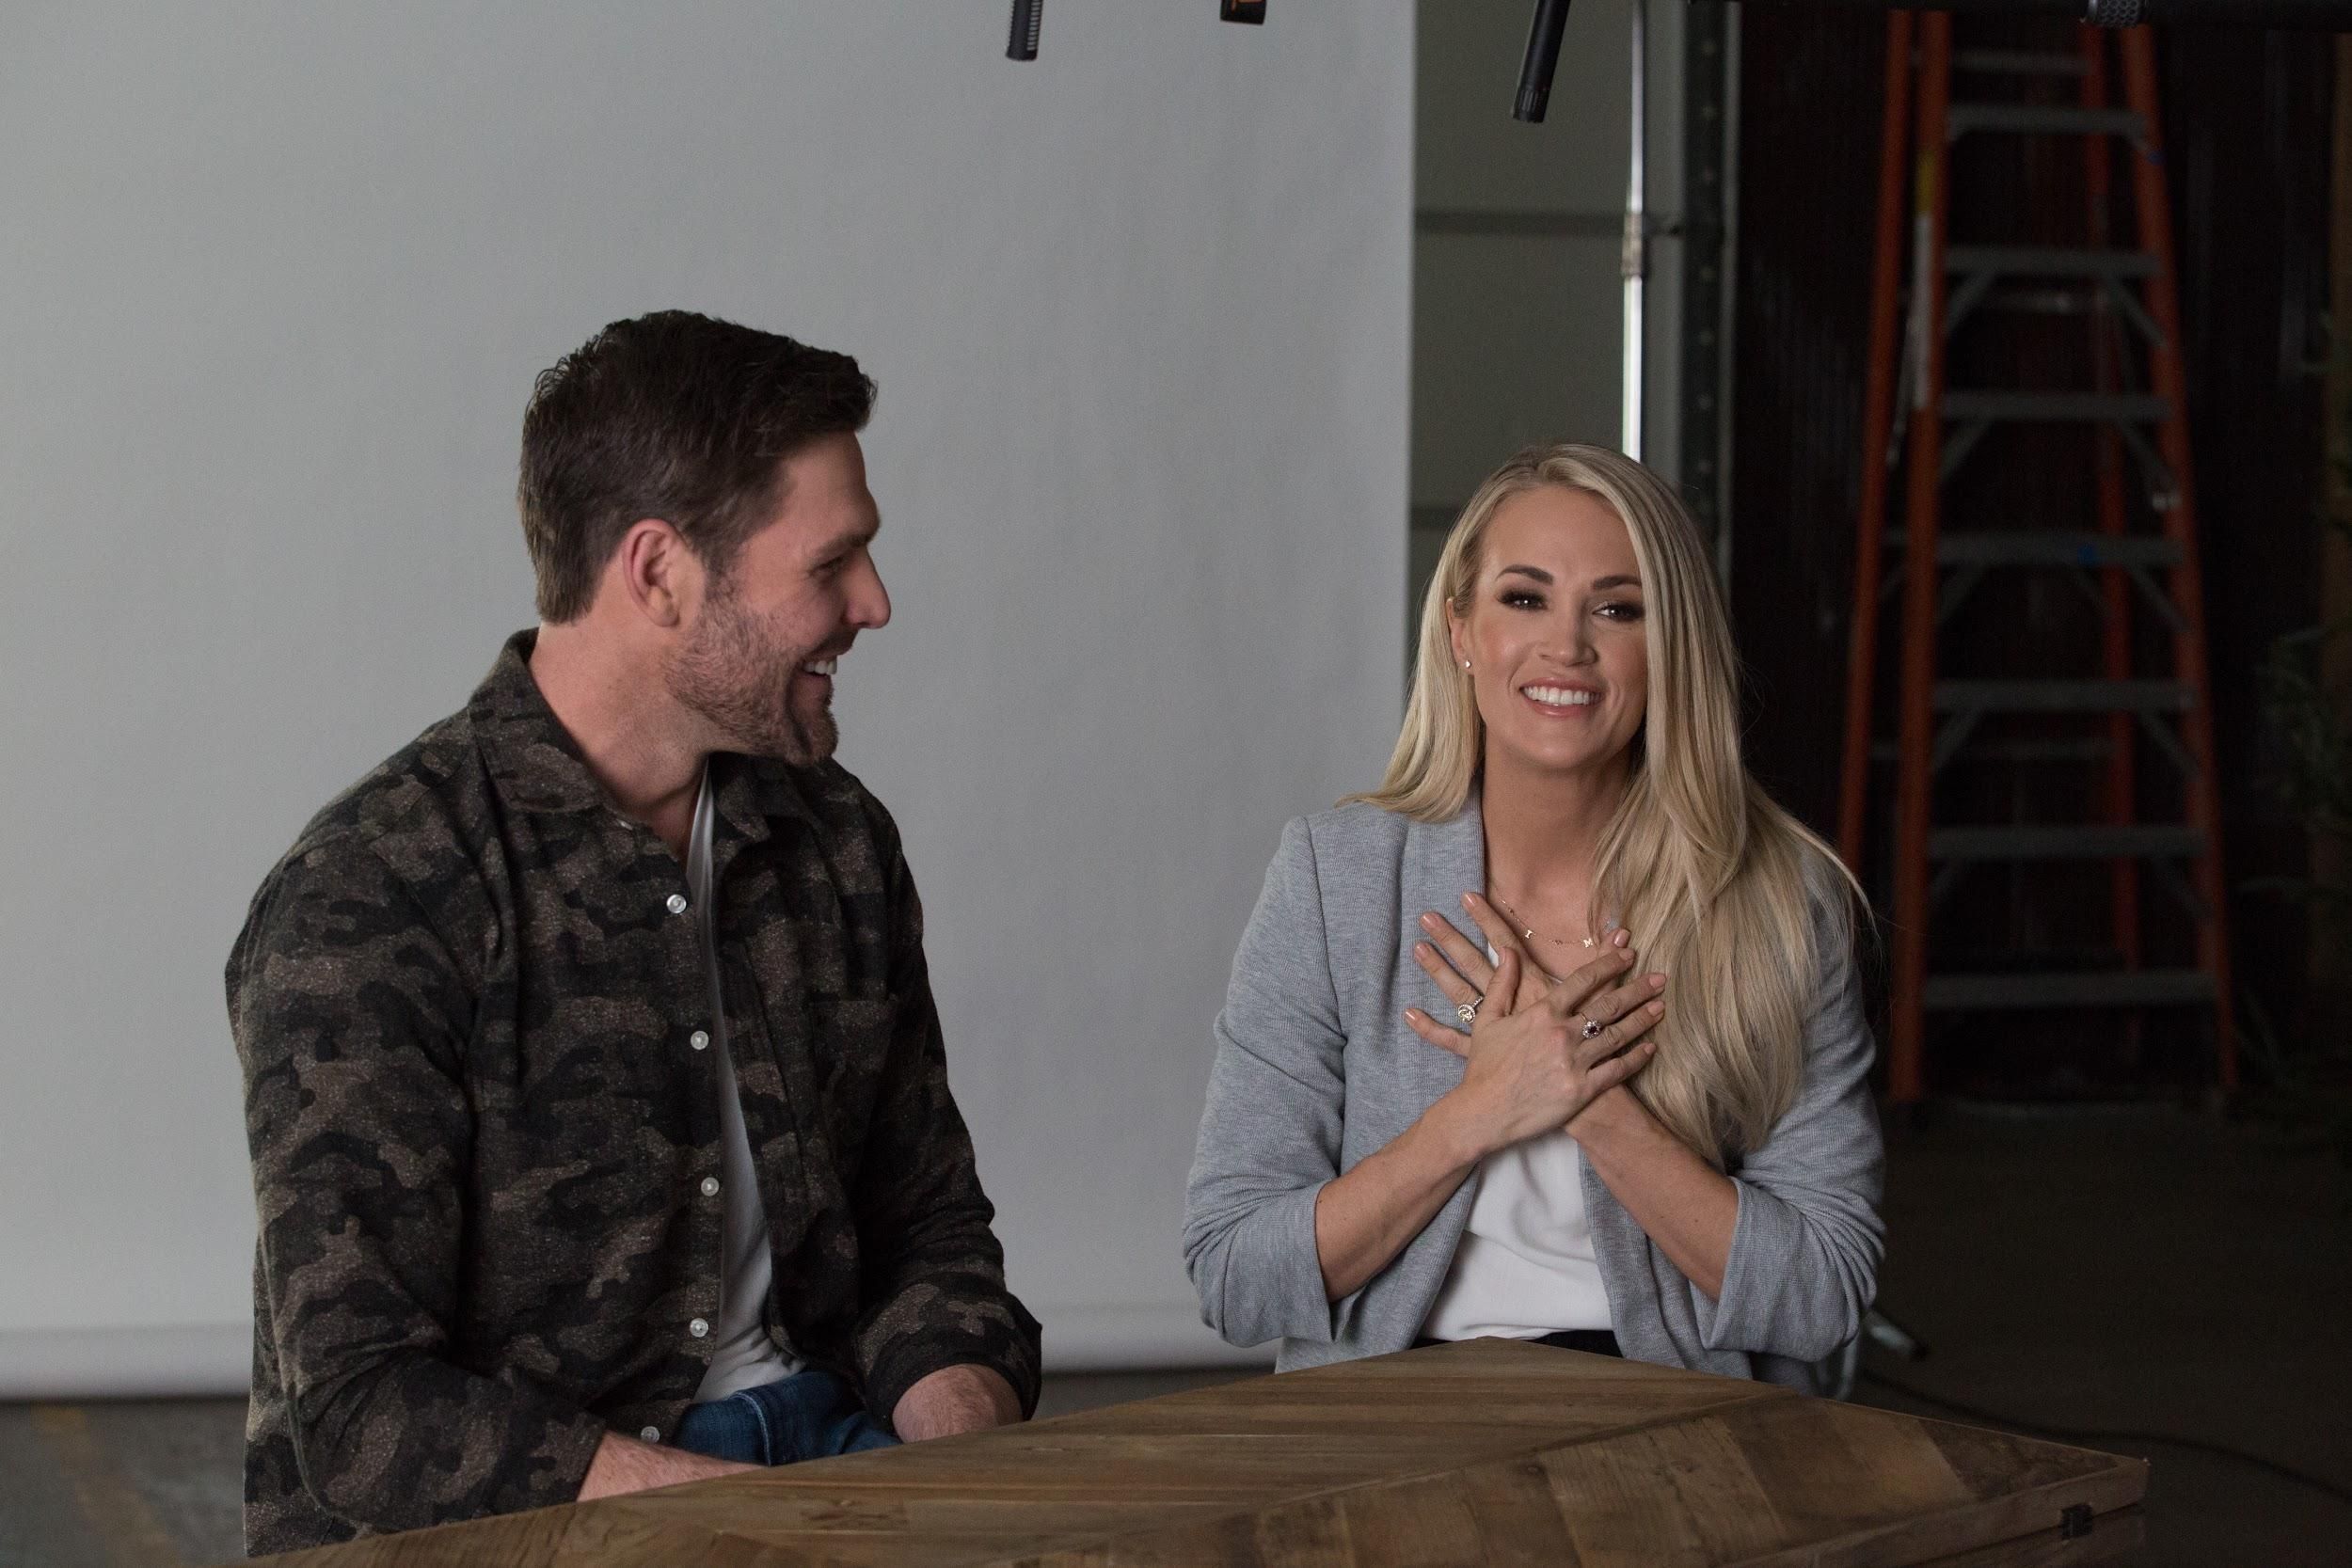 Carrie Underwood Shares Personal Family Photos in 'What I Never